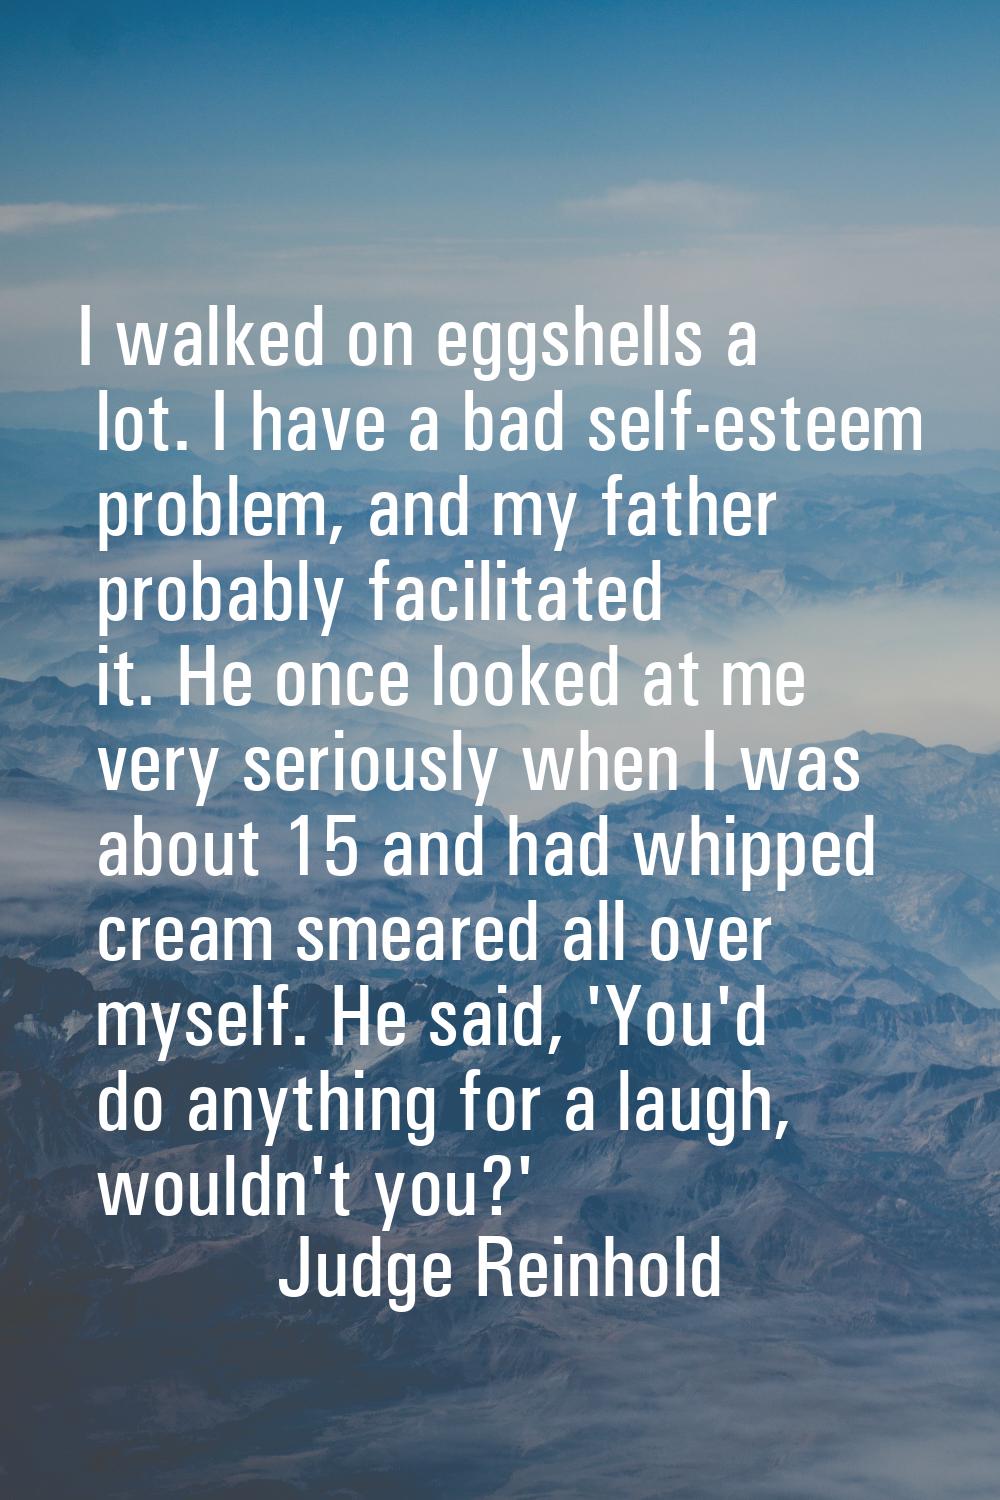 I walked on eggshells a lot. I have a bad self-esteem problem, and my father probably facilitated i